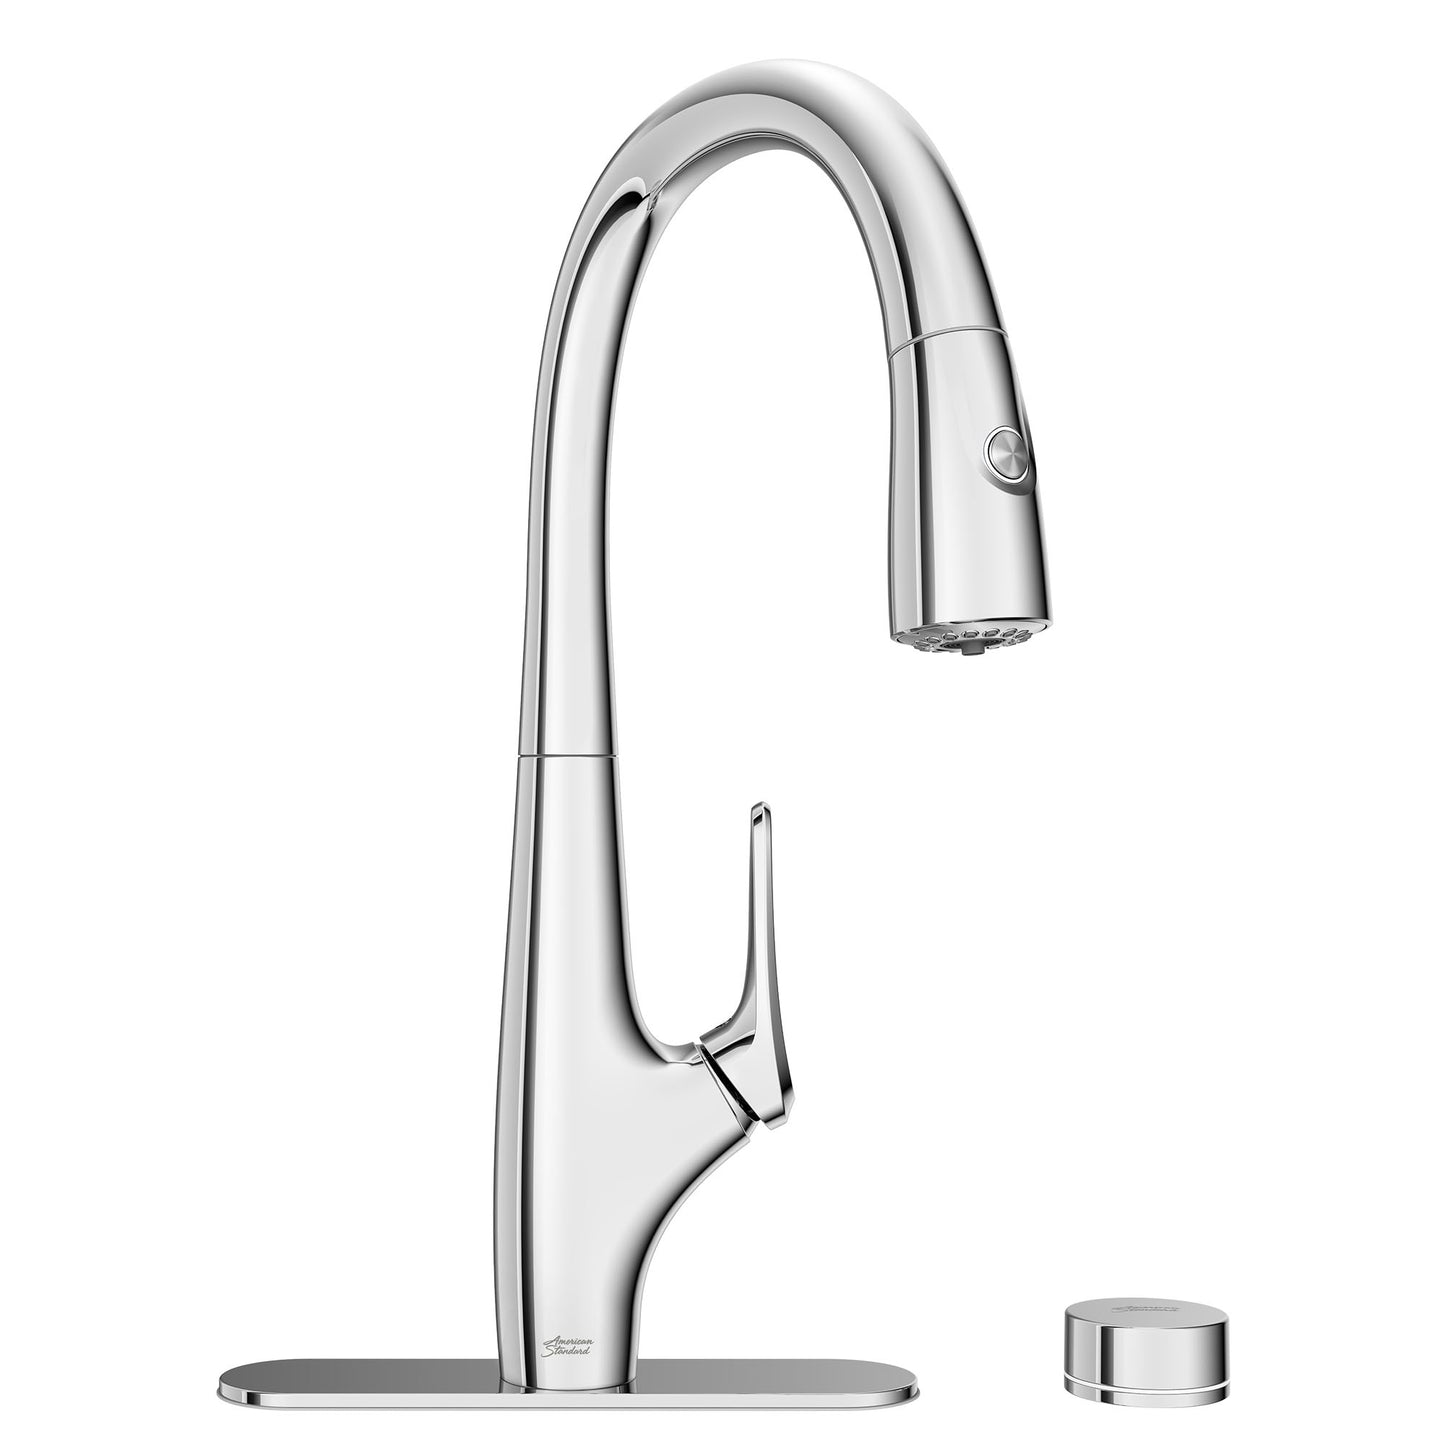 AMERICAN-STANDARD 4902330.002, Saybrook Single-Handle Pull-Down Dual Spray Kitchen Faucet 1.5 gpm/5.7 L/min With Filter in Chrome